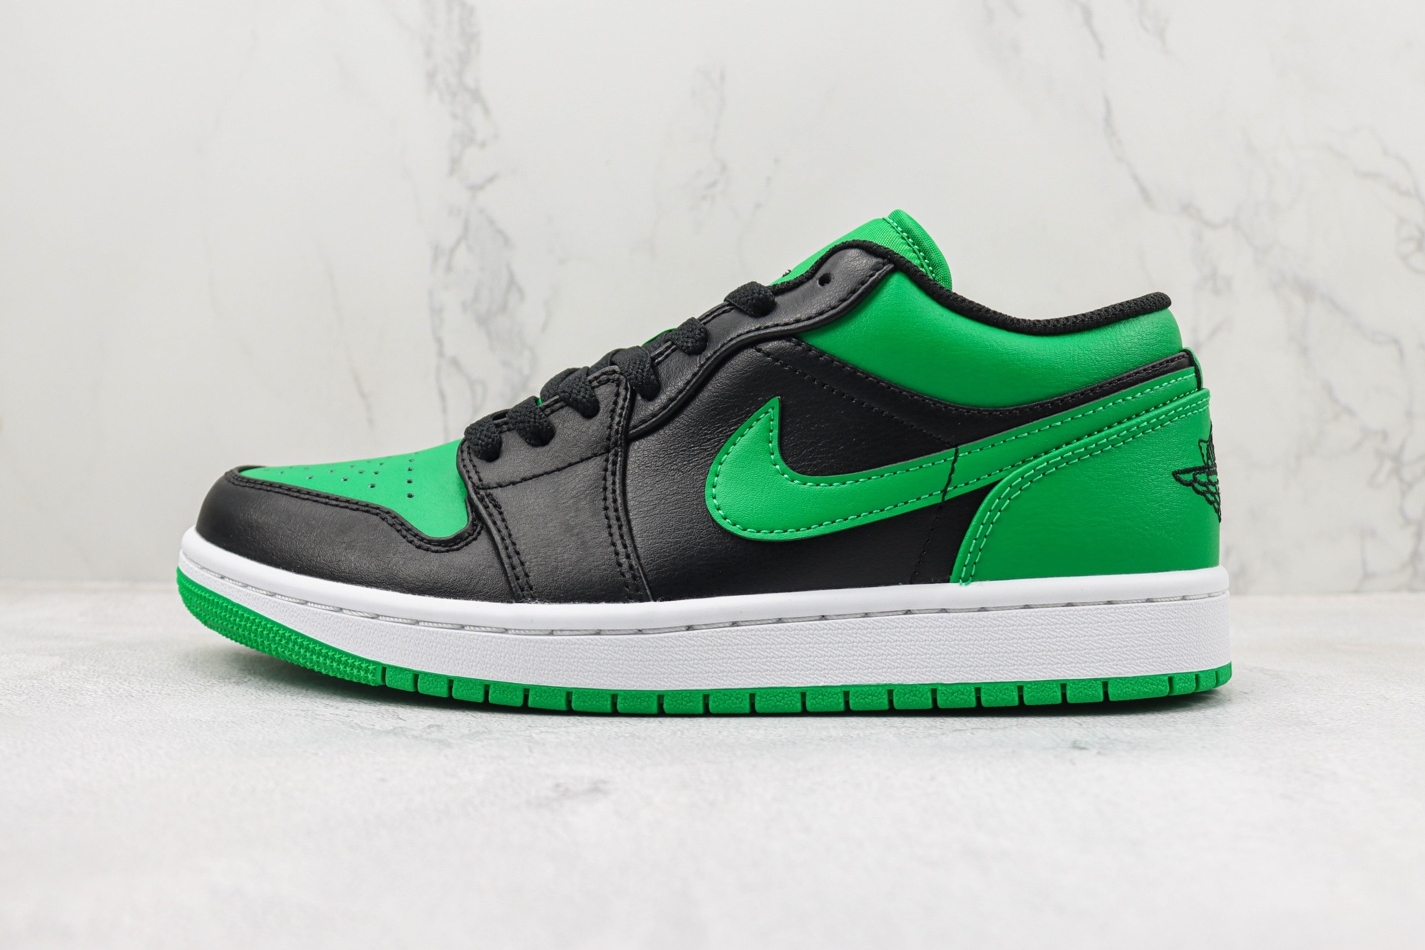 Air Jordan 1 Low 'Lucky Green' 553558-065: Premium Sneakers with Iconic Style